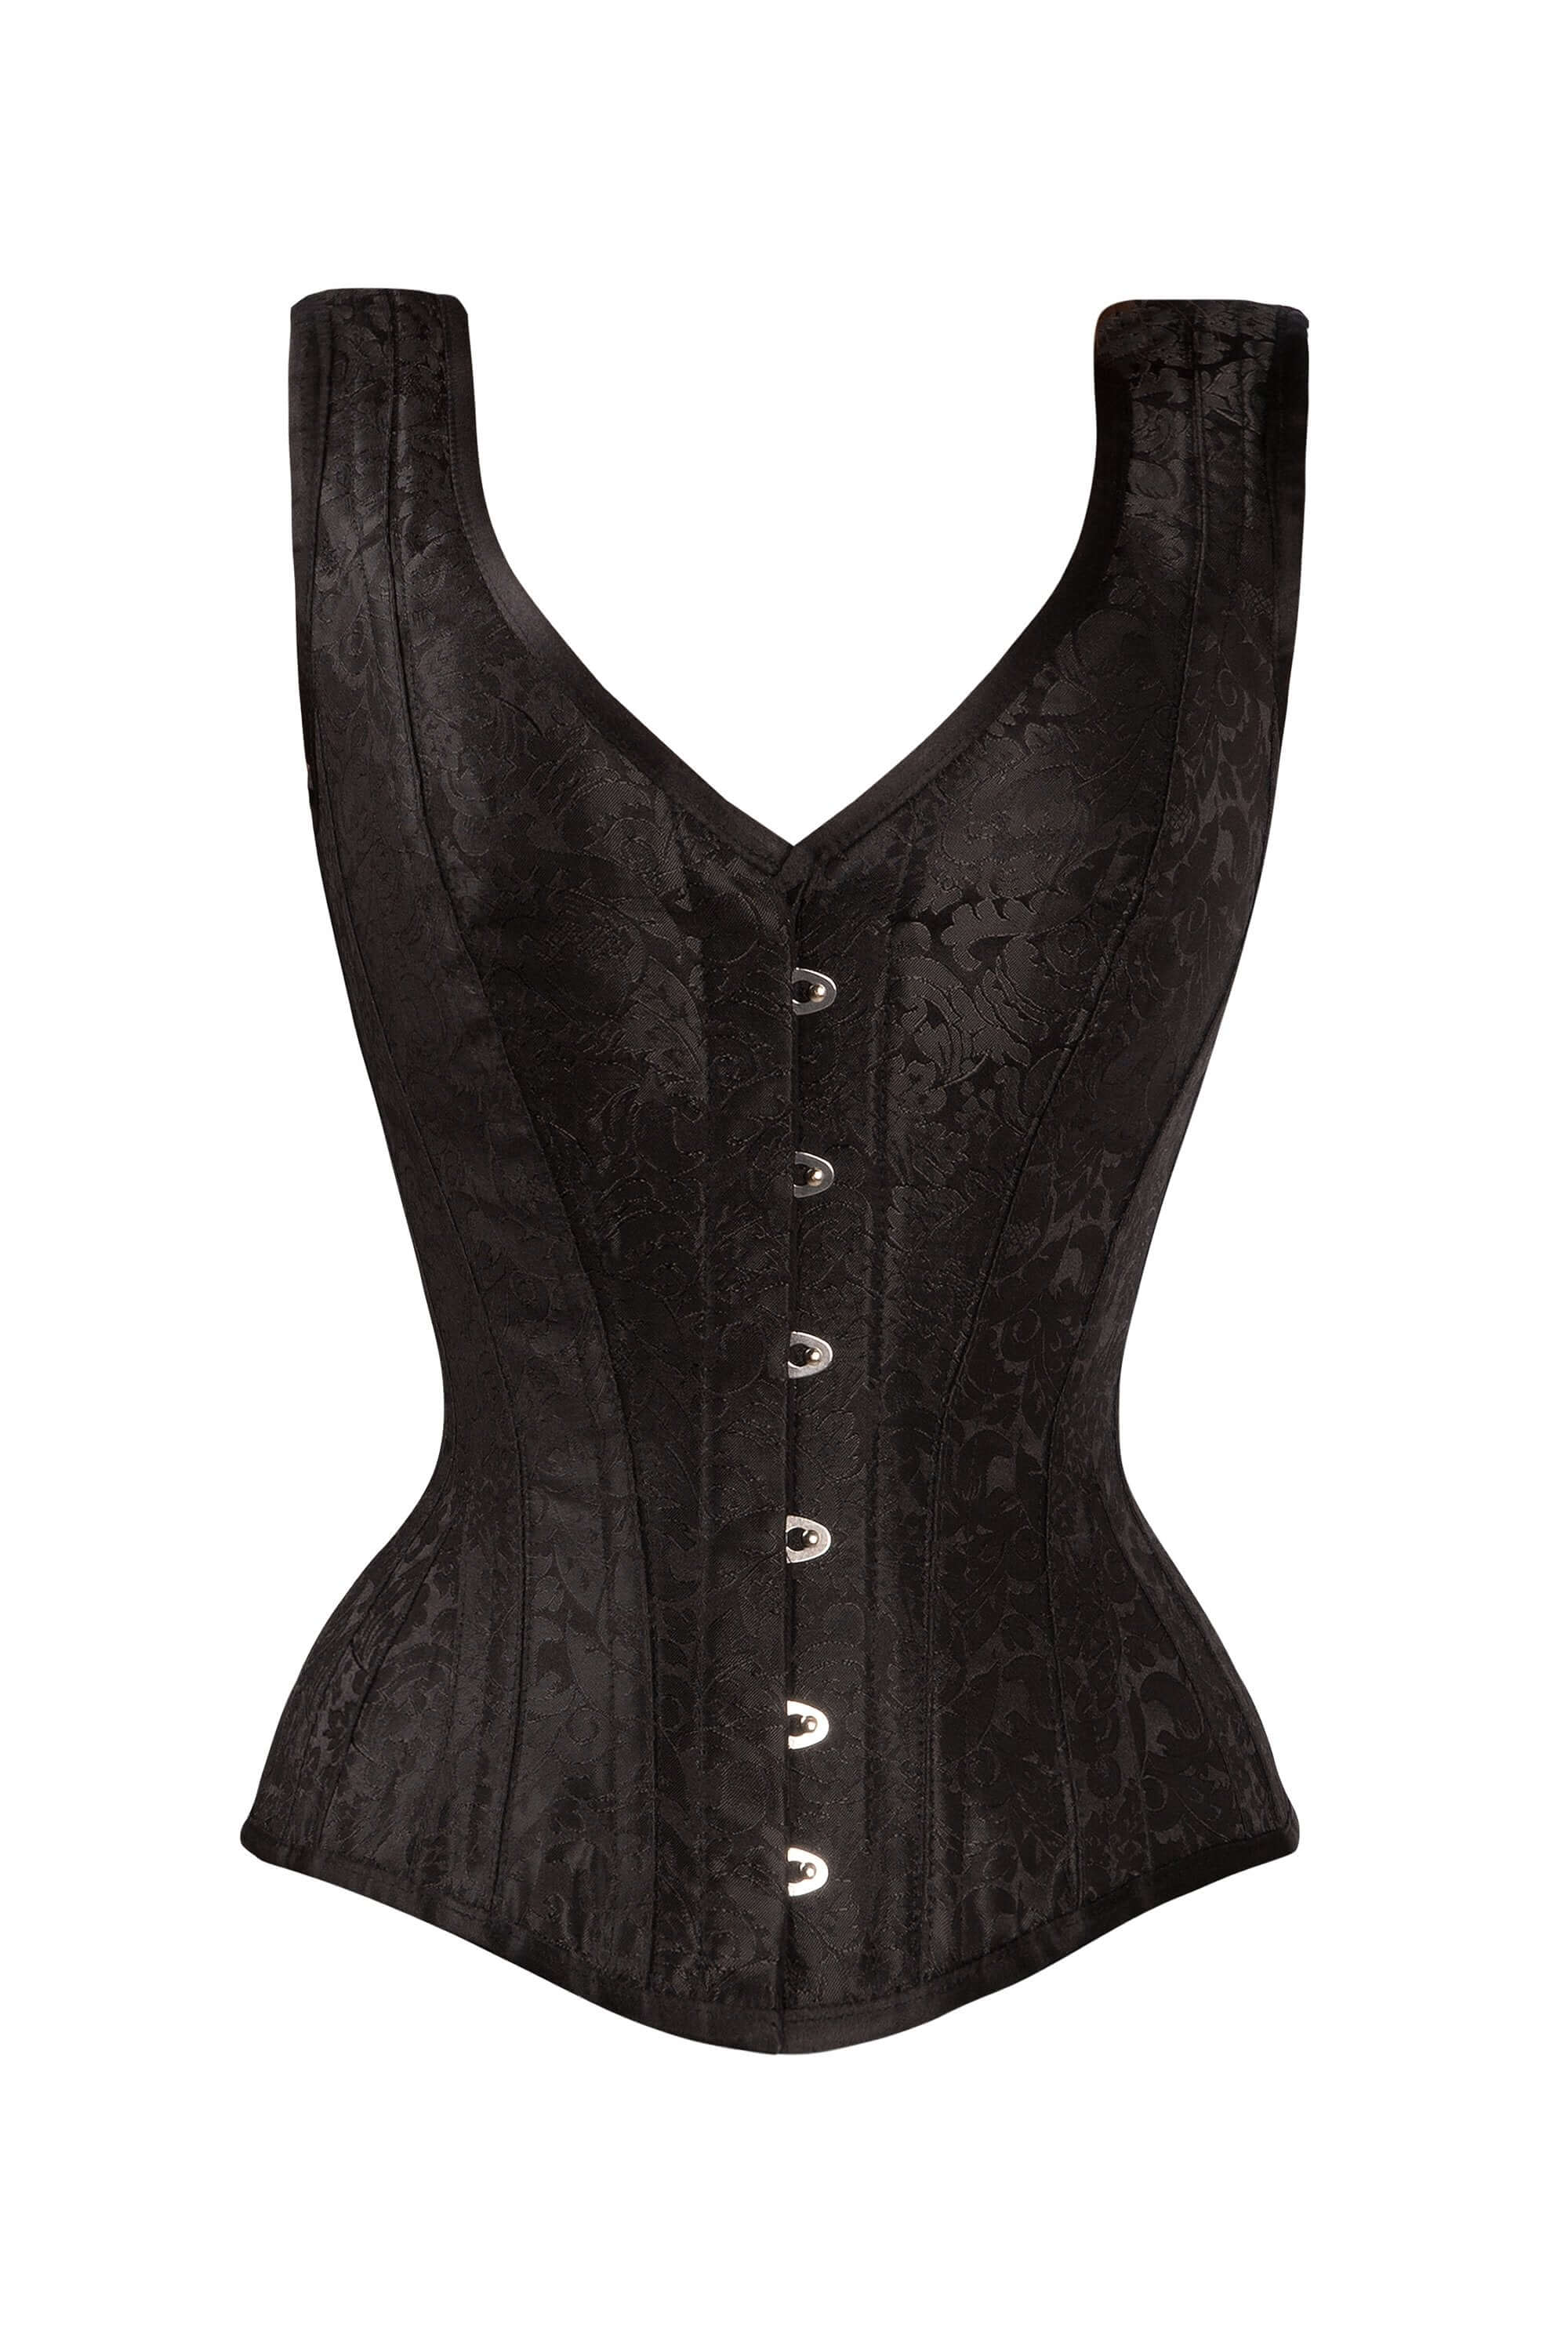 Marigold Black Cotton Corset Top with Frill Sleeves